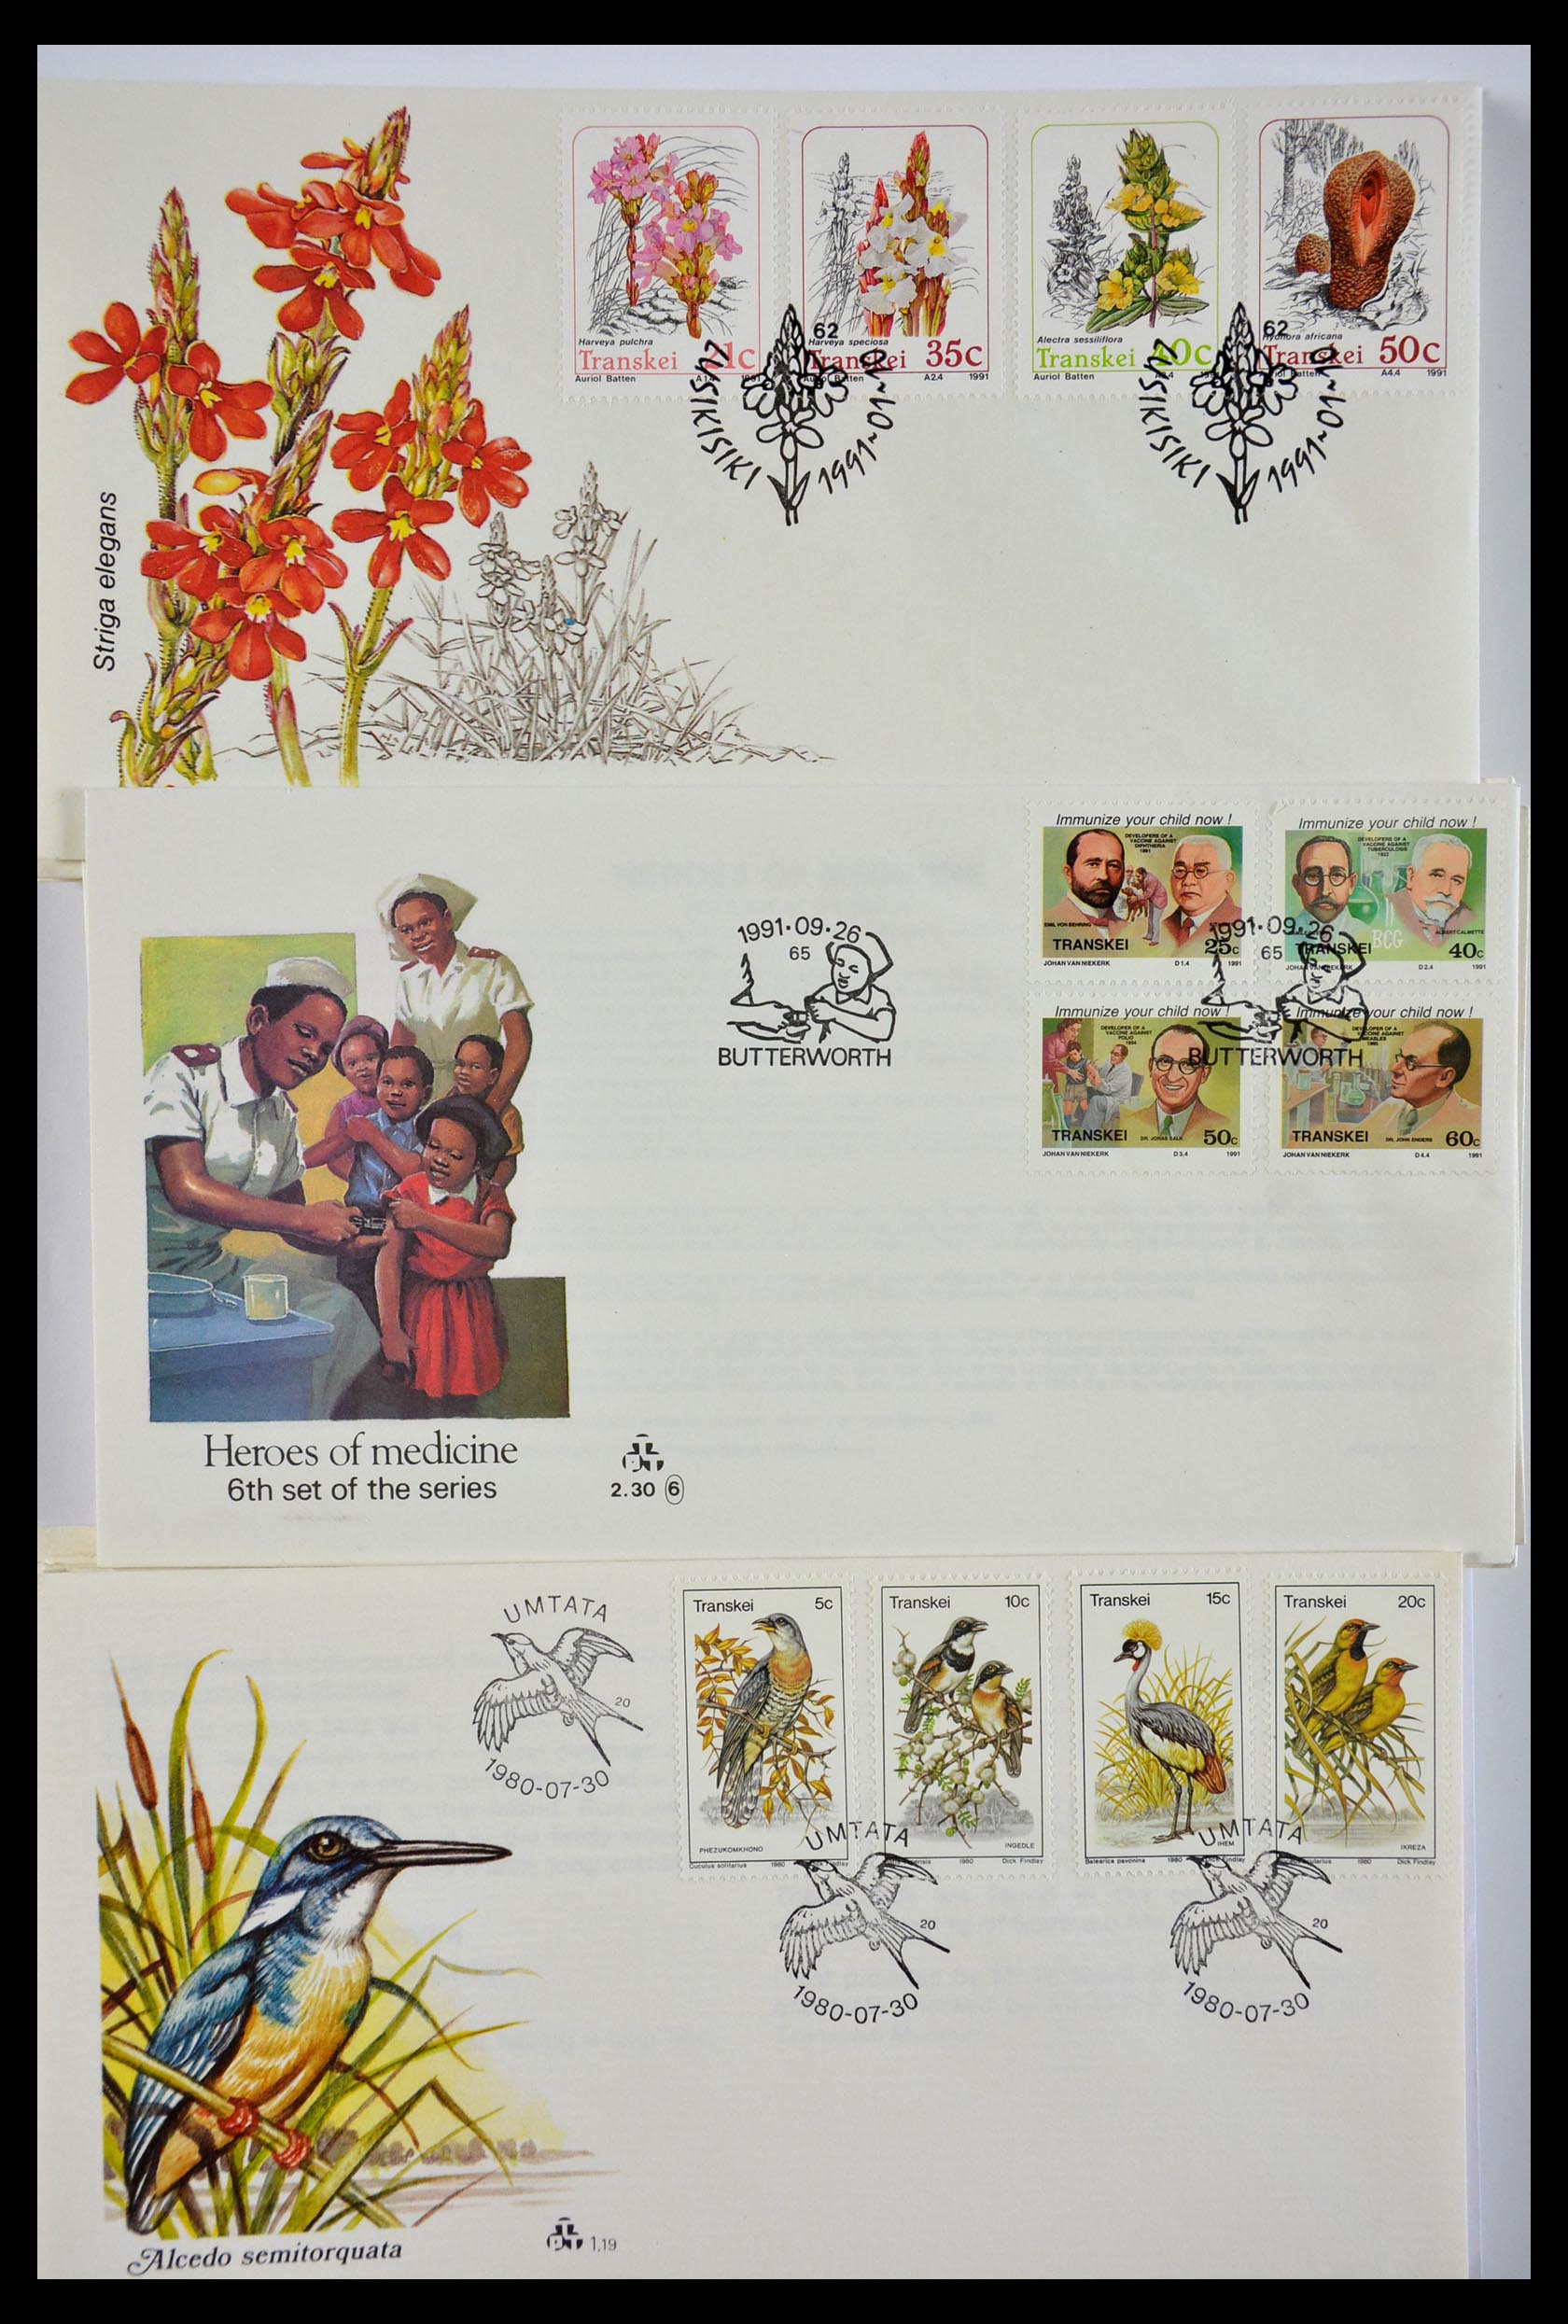 29356 549 - 29356 South Africa homelands first day covers 1979-1991.